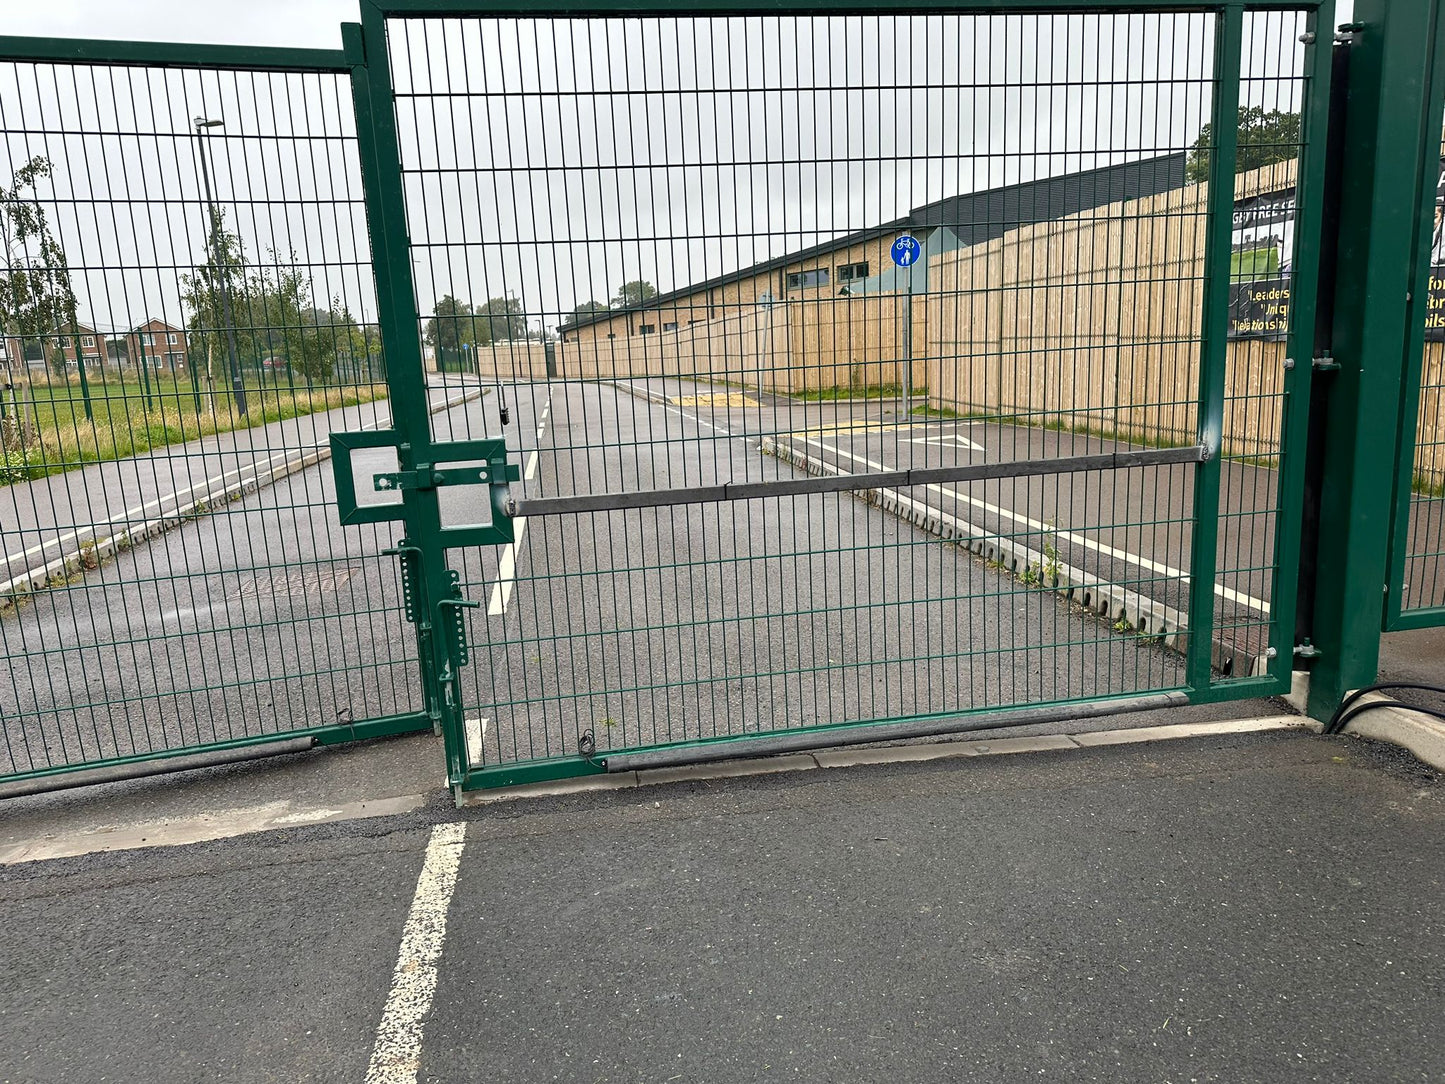 Automatic Commercial and Industrial Gates - Security Metal Gates with Access Control - Iron Metal Electric Driveway Gate